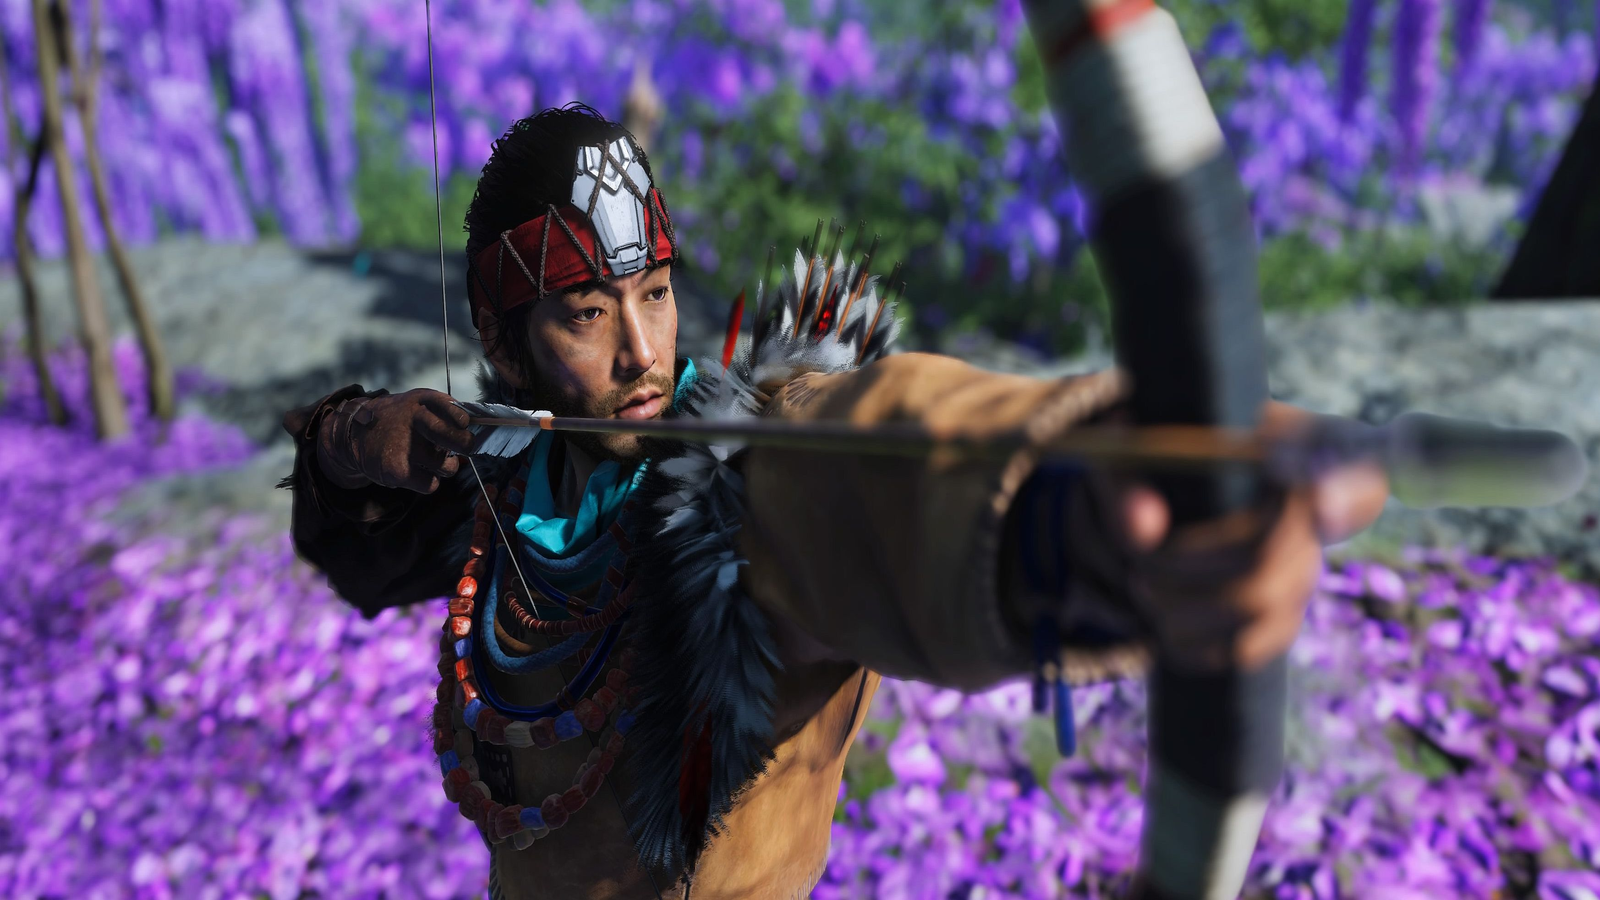 Ghost of Tsushima Sequel or DLC Again Hinted at by Sucker Punch Job Ads